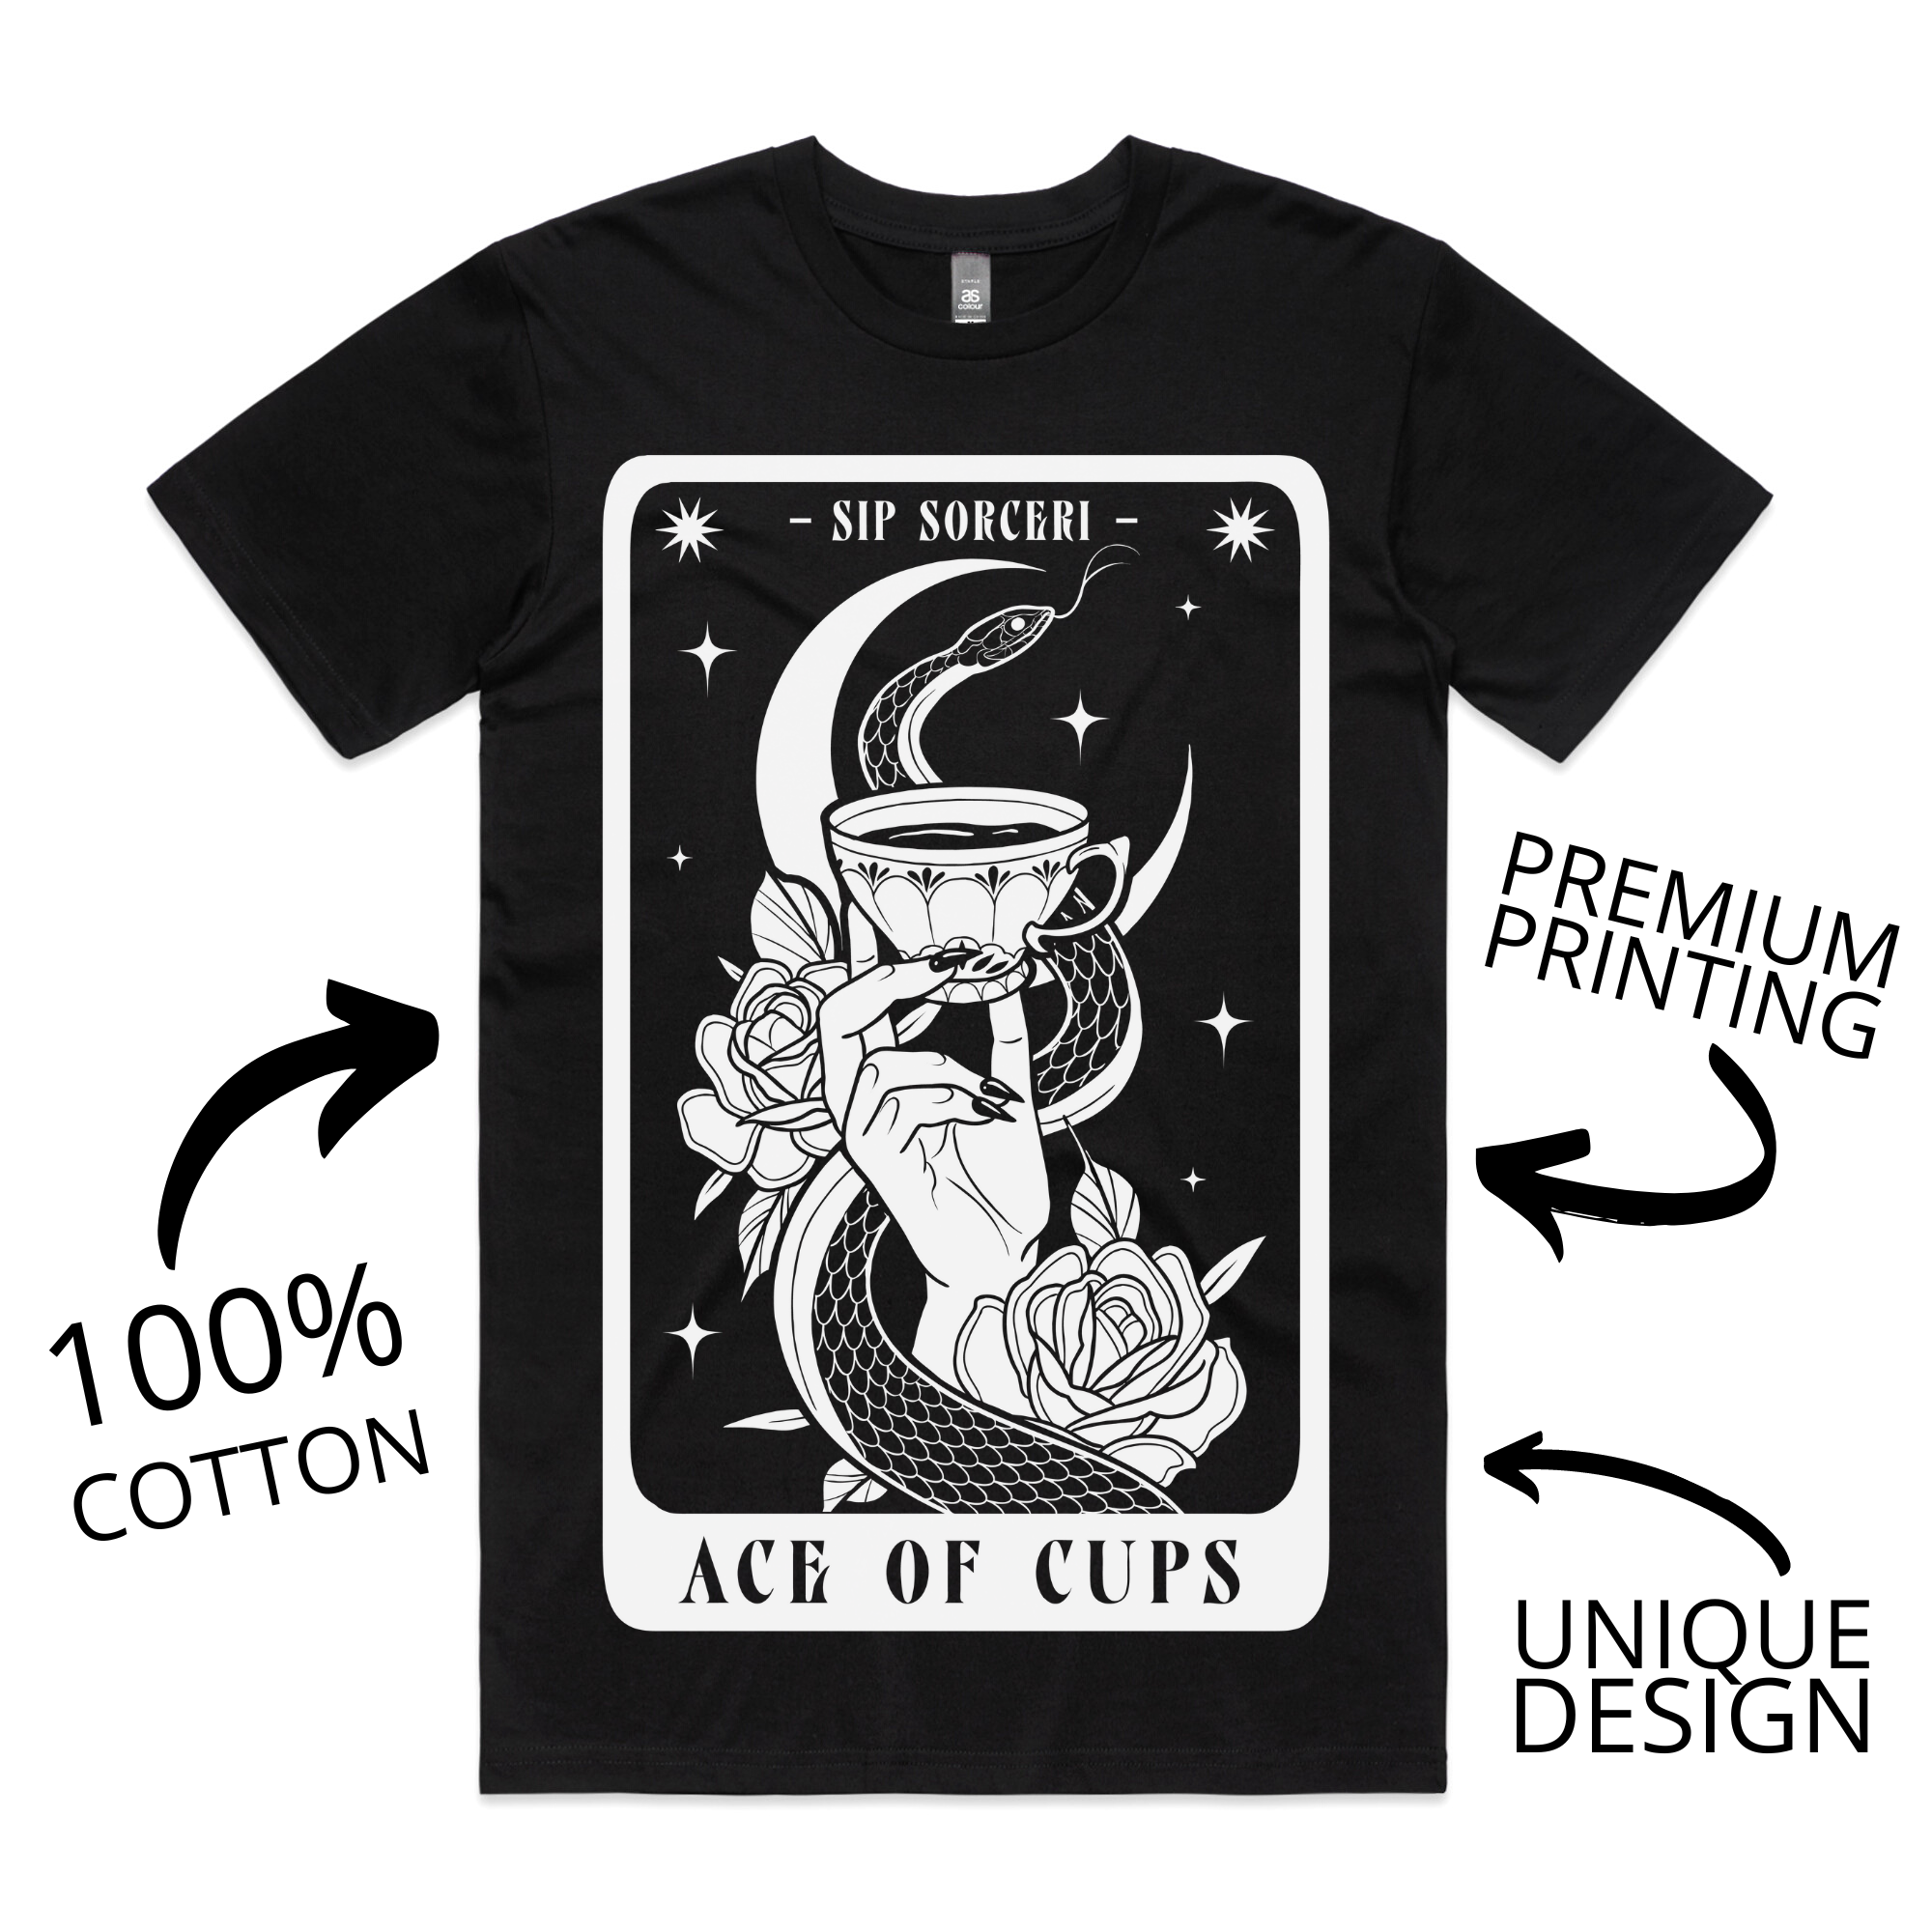 Ace of Cups T-Shirt